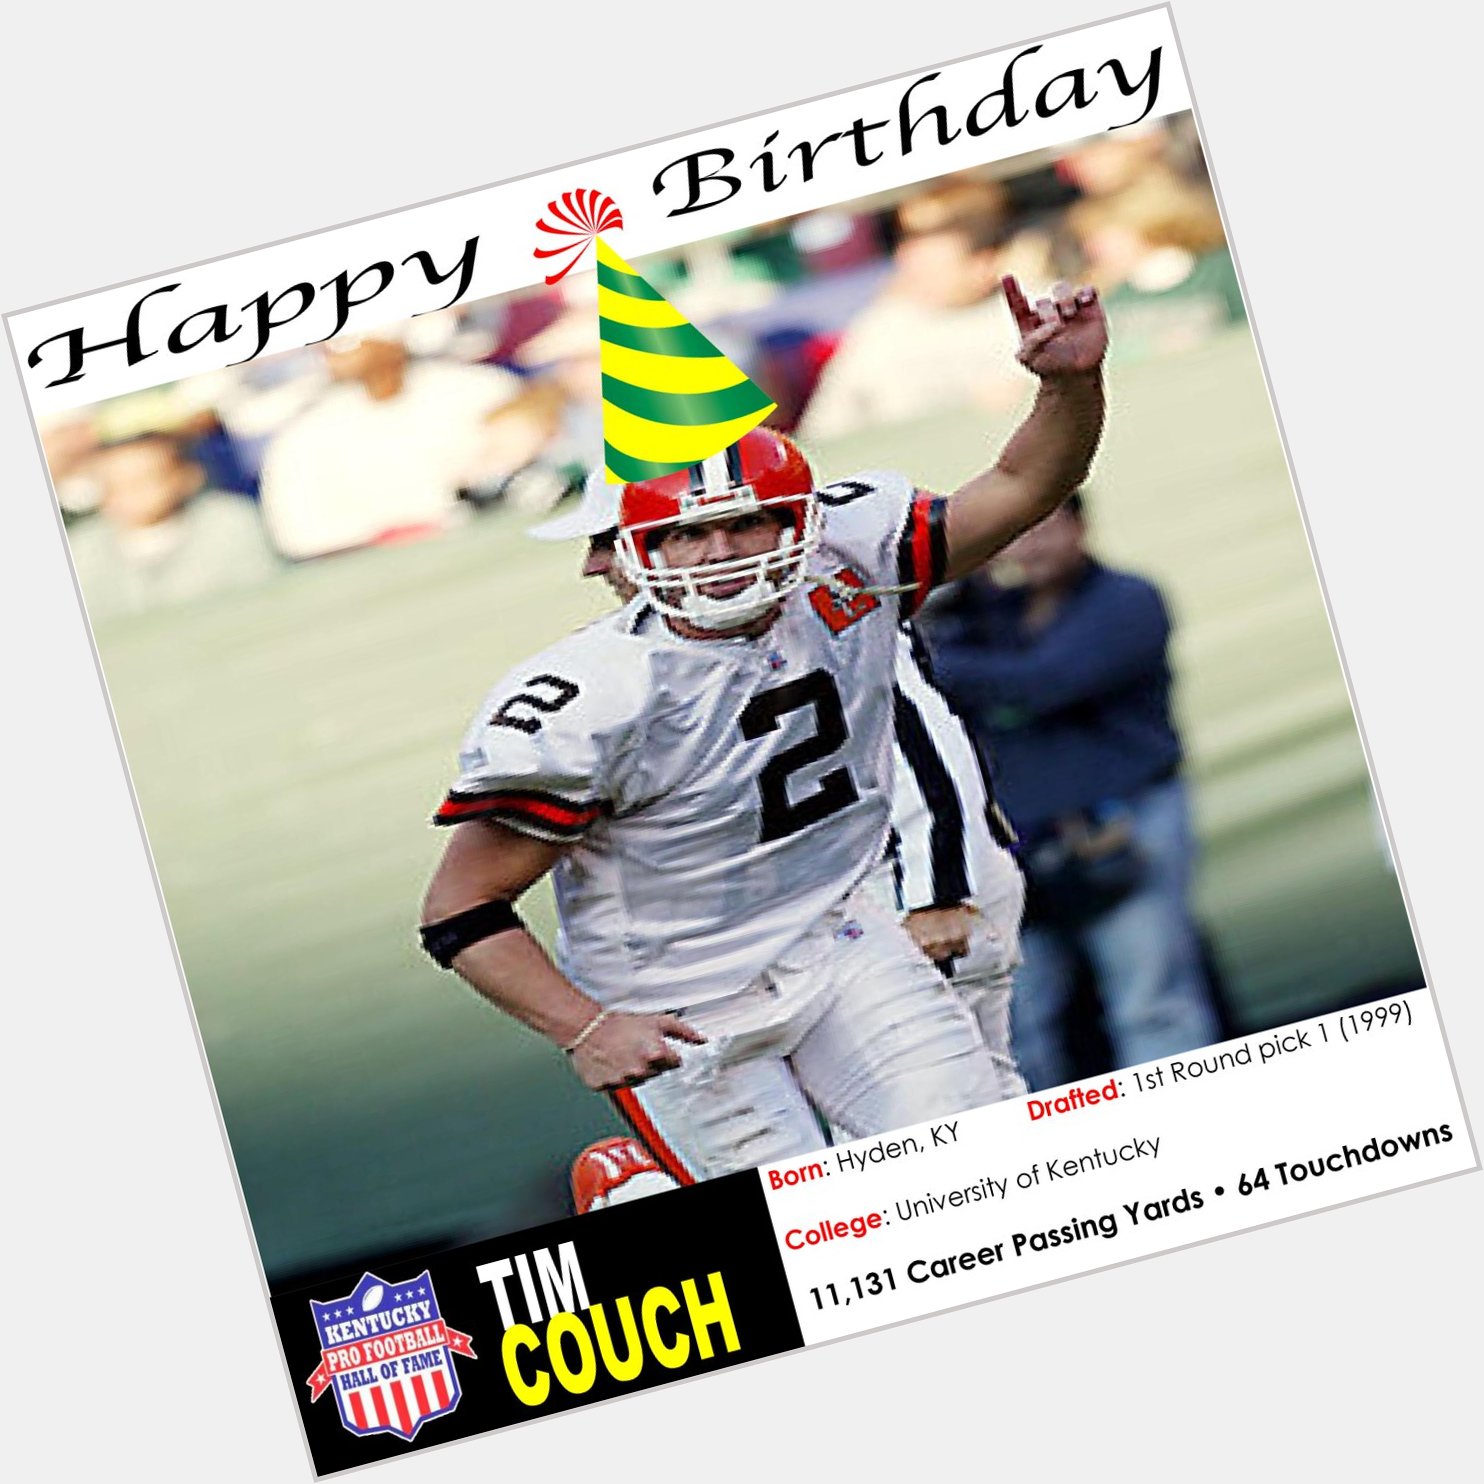 Today is KY Pro Football Hall of Famer Tim Couch\s birthday! Everybody wish him happy birthday with a 